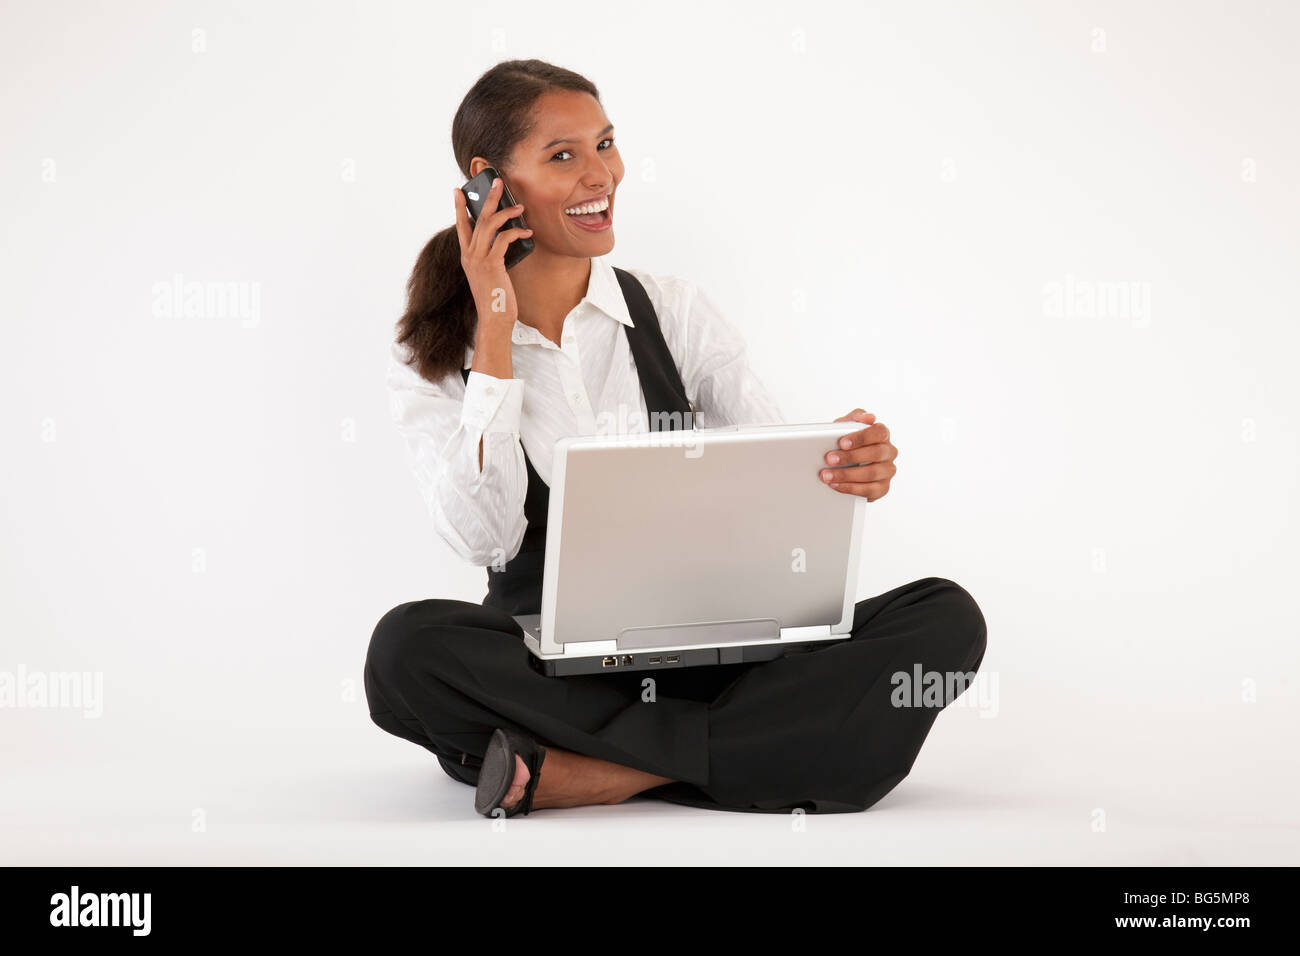 Young woman sitting on floor using laptop and cell phone. Horizontally format. Stock Photo